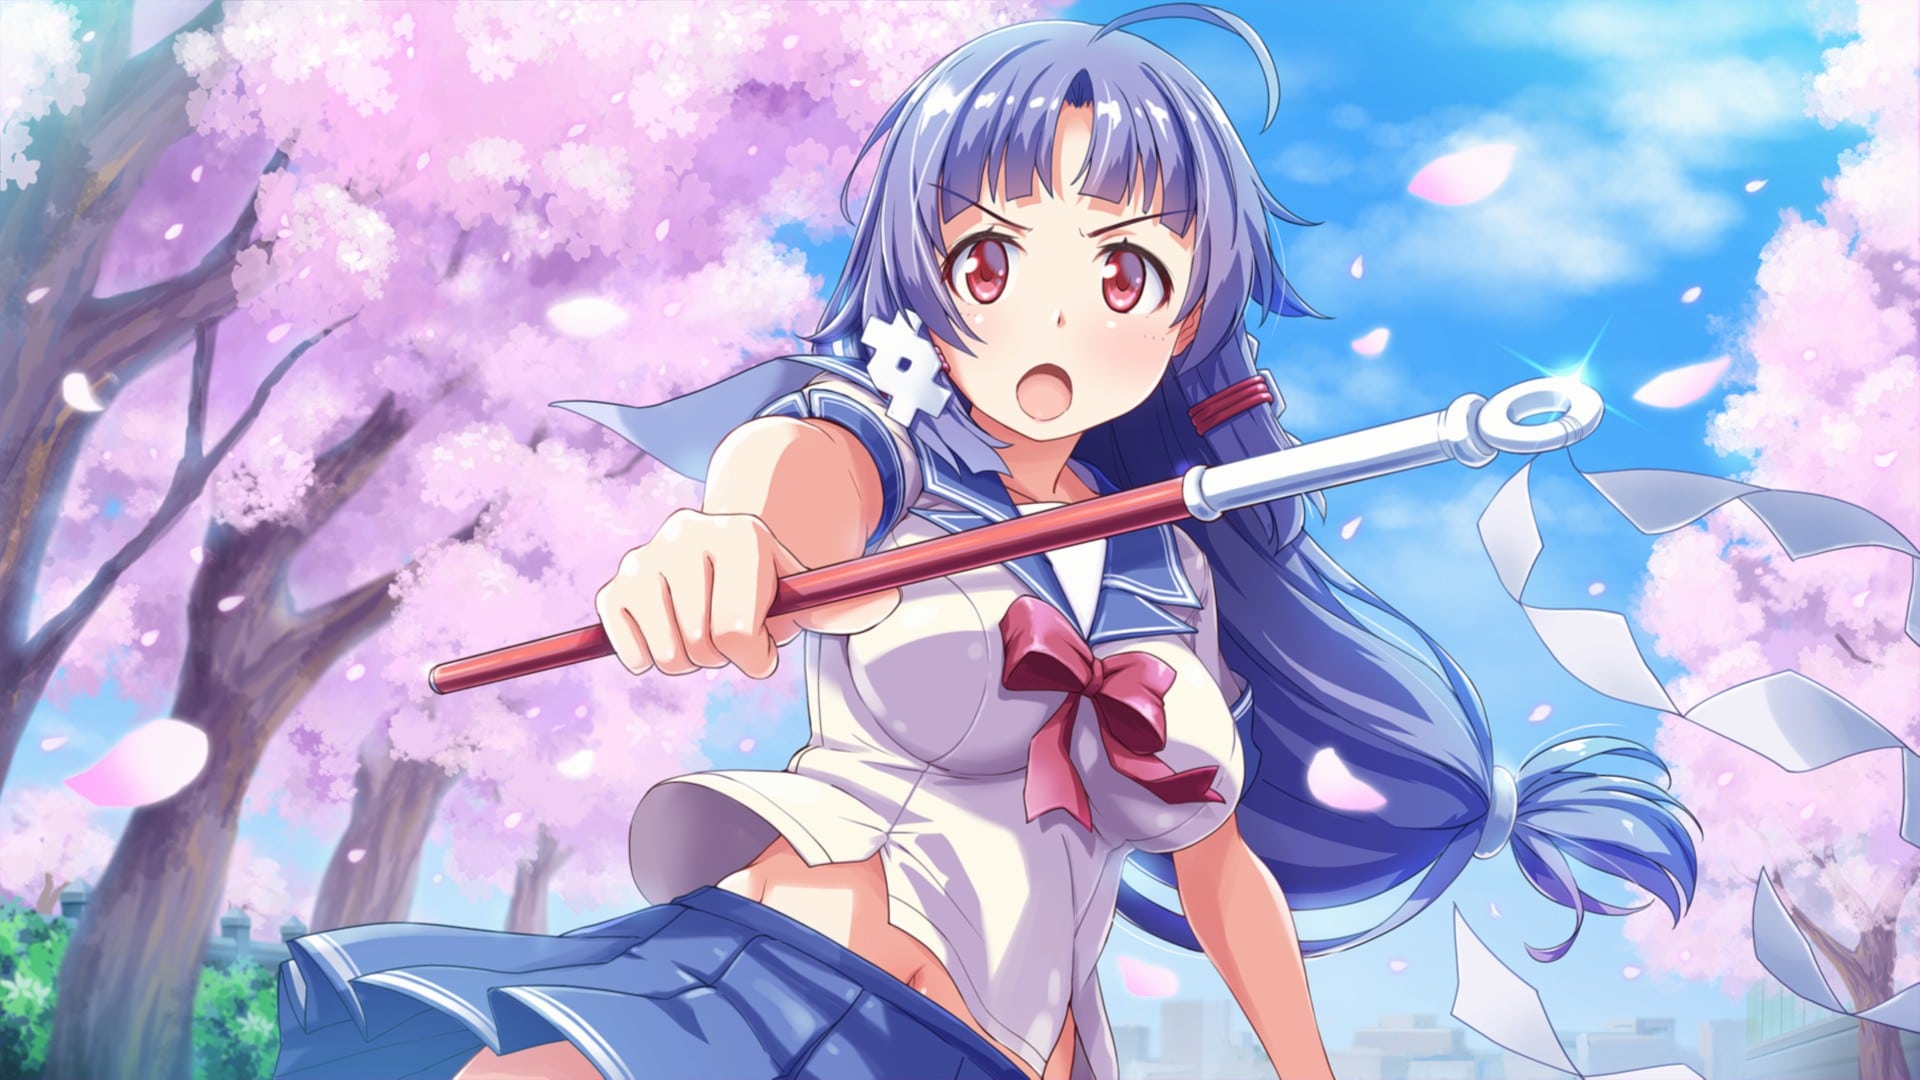 Get Handsy With Gal*Gun Returns Sooner, Free Demo Launches Later Today on Steam